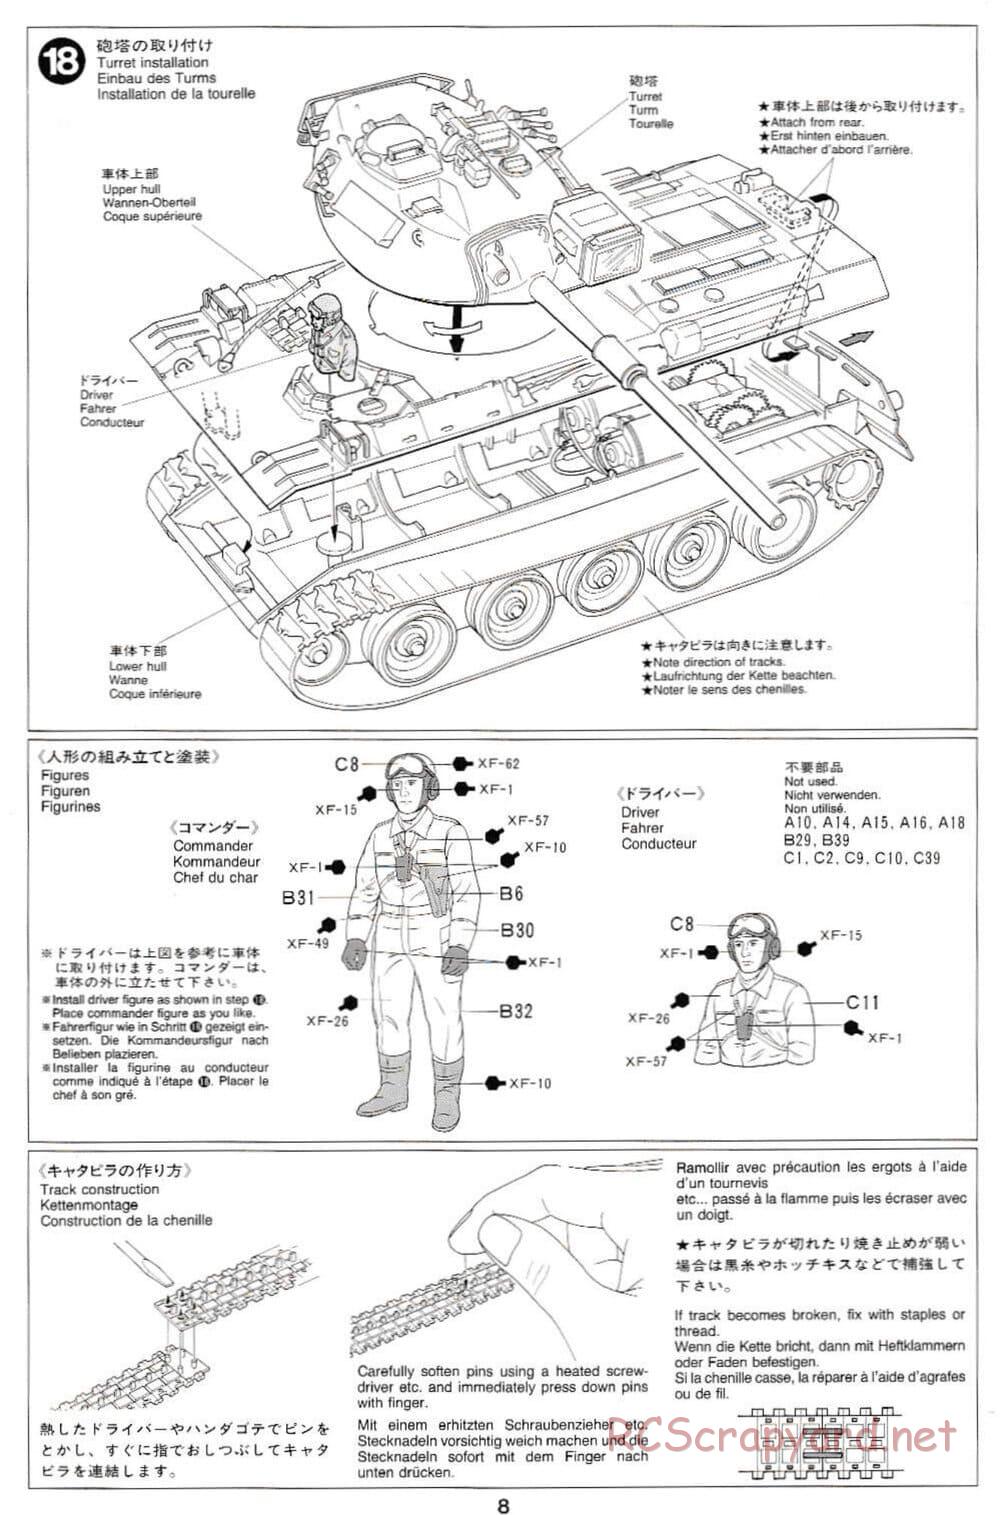 Tamiya - J.G.S.D.F. Type 74 - 1/35 Scale Chassis - Manual - Page 8